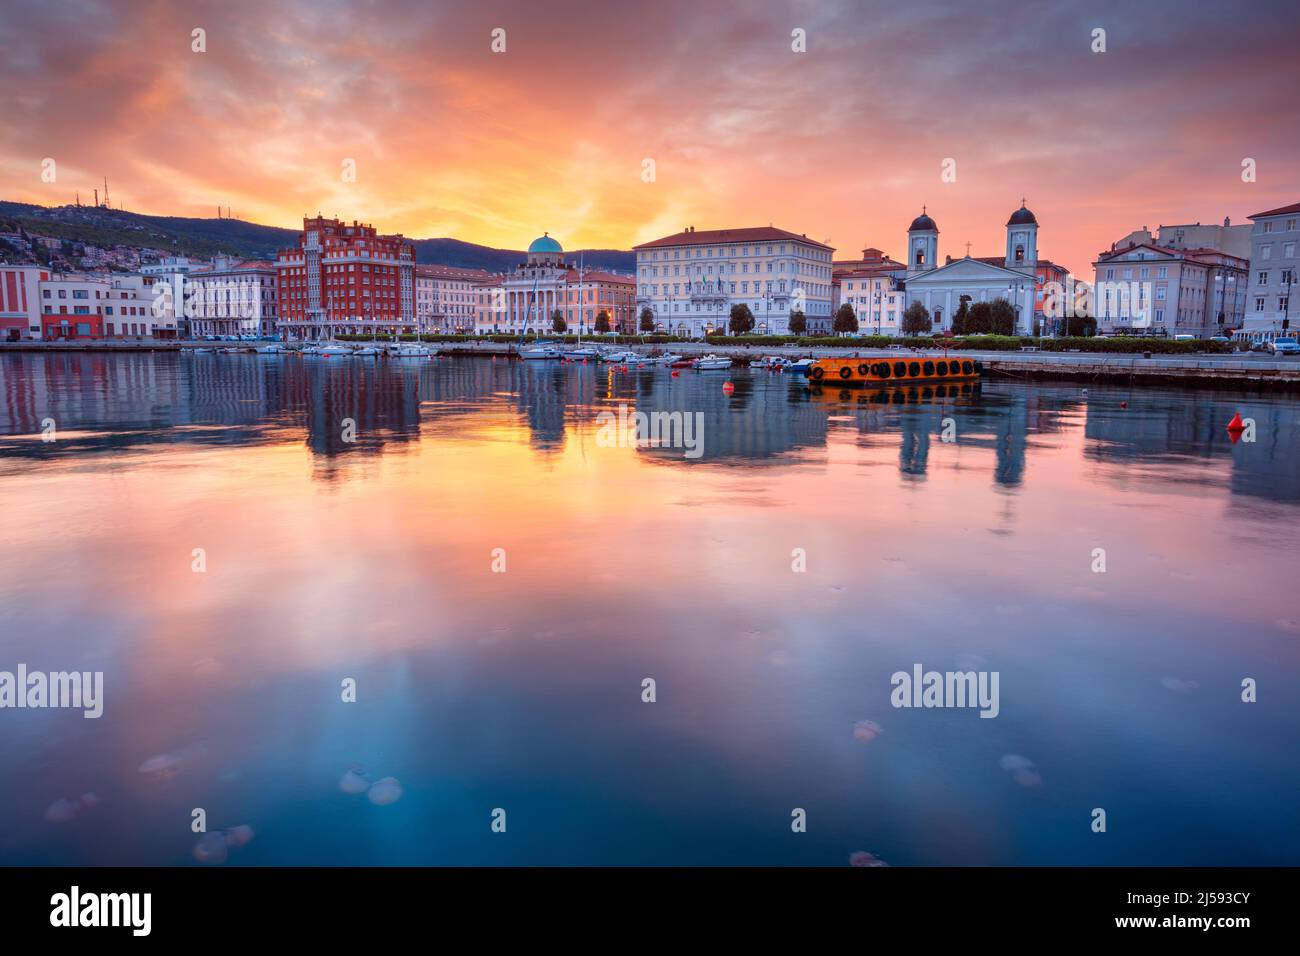 Trieste, Italy. Cityscape image of downtown Trieste, Italy at dramatic sunrise. Stock Photo